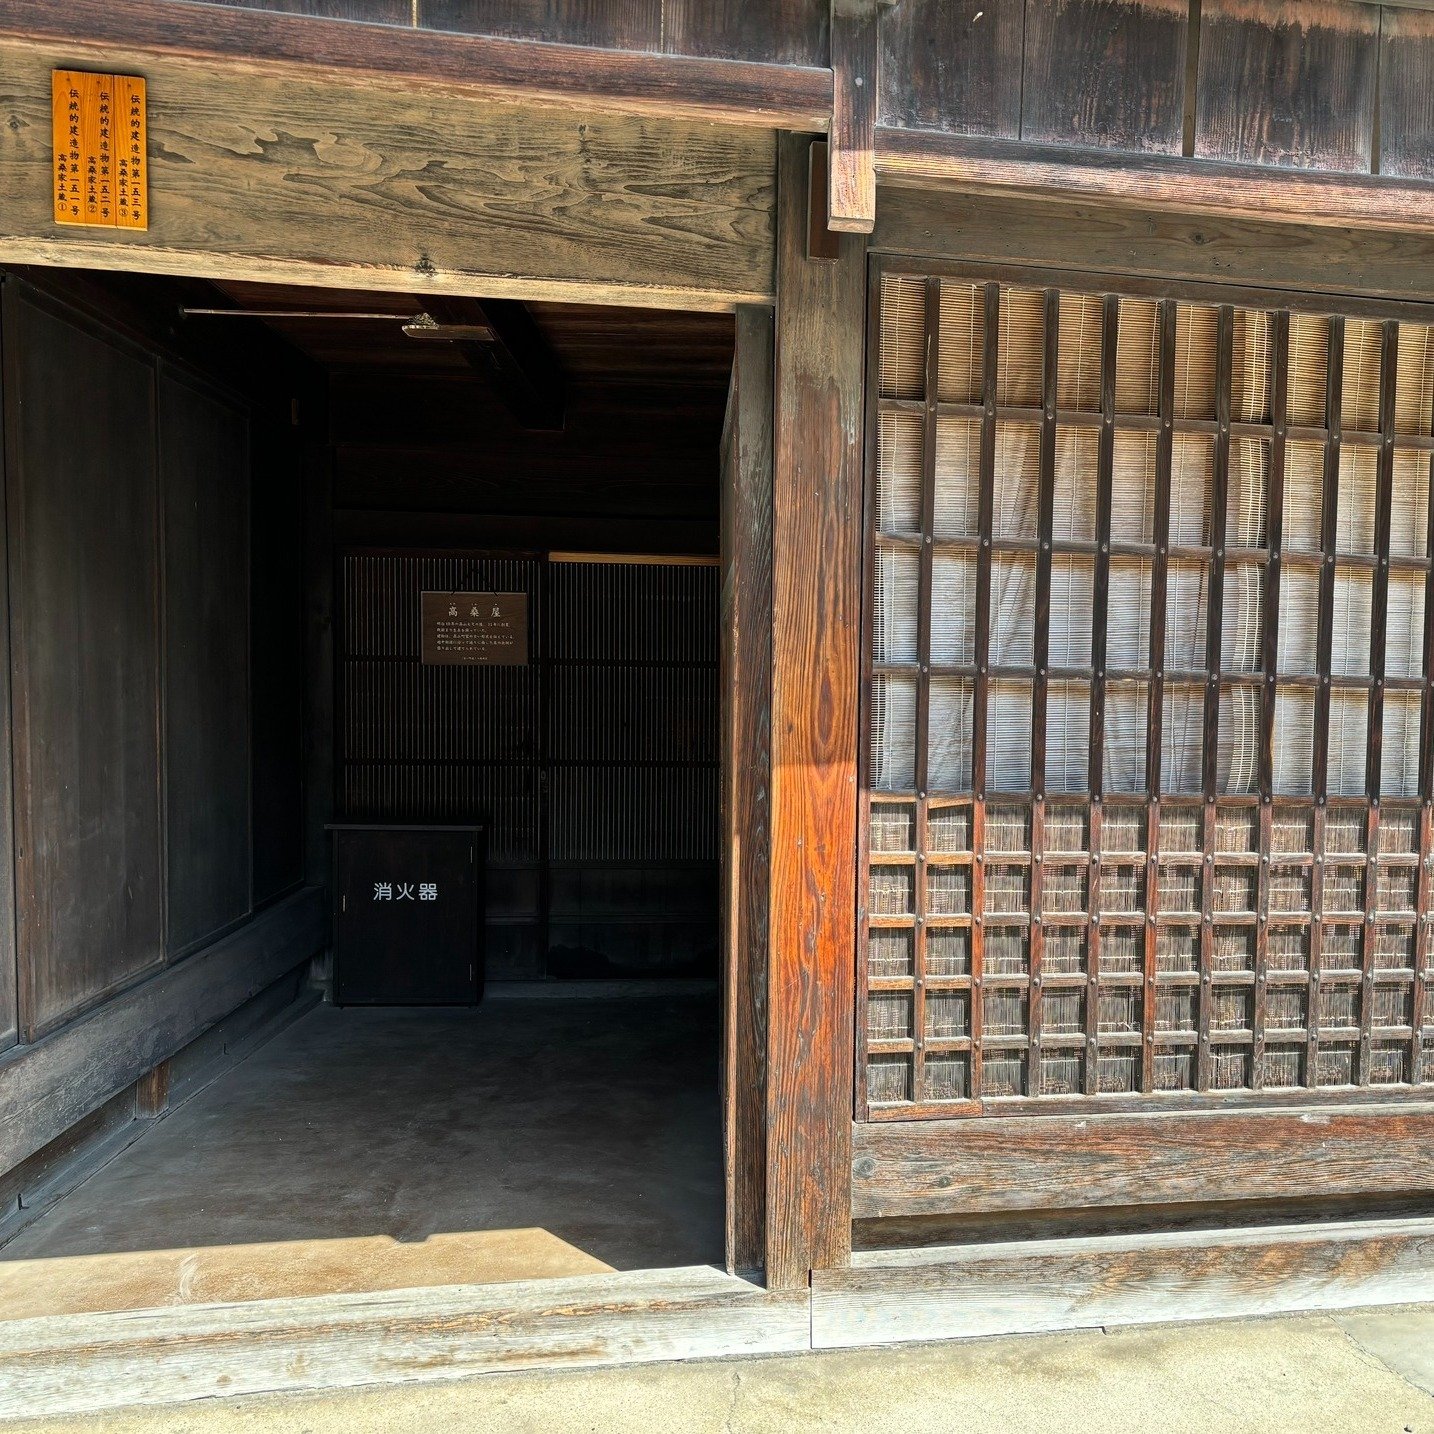 April has been a month of travel! 🙌  Hannah to Japan, and Joneen to Europe. Wonderful architecture, cultures, design and food. 
This Edo Period inspired entrance to a Japanese home shows the detailed construction in timber, thatching and screens. Mo